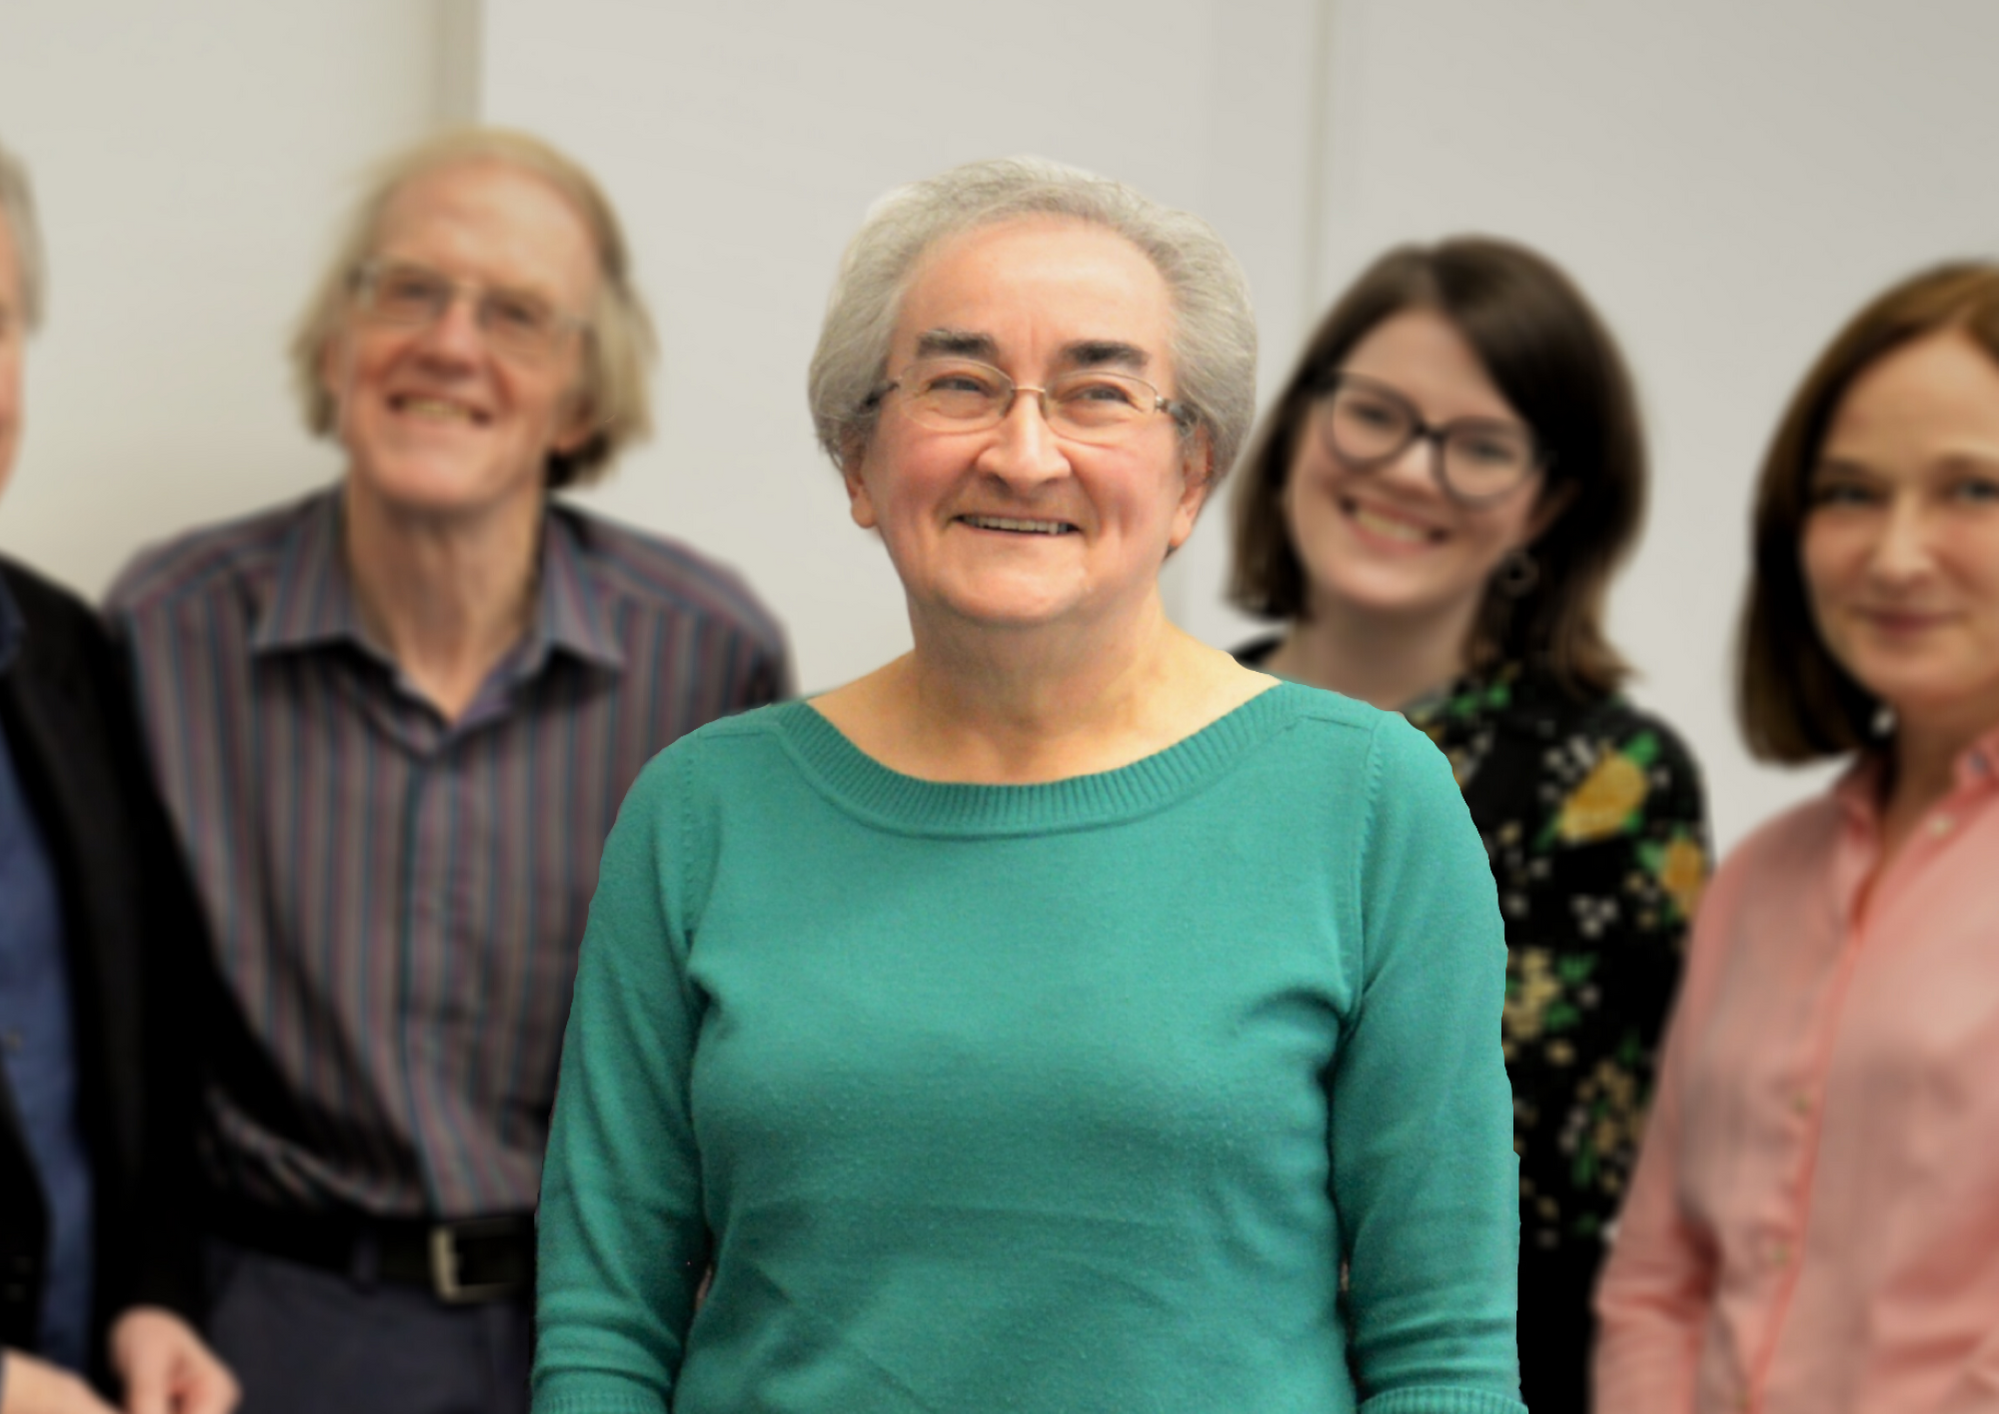 Four people standing for a photo with the person in the middle wearing a green top